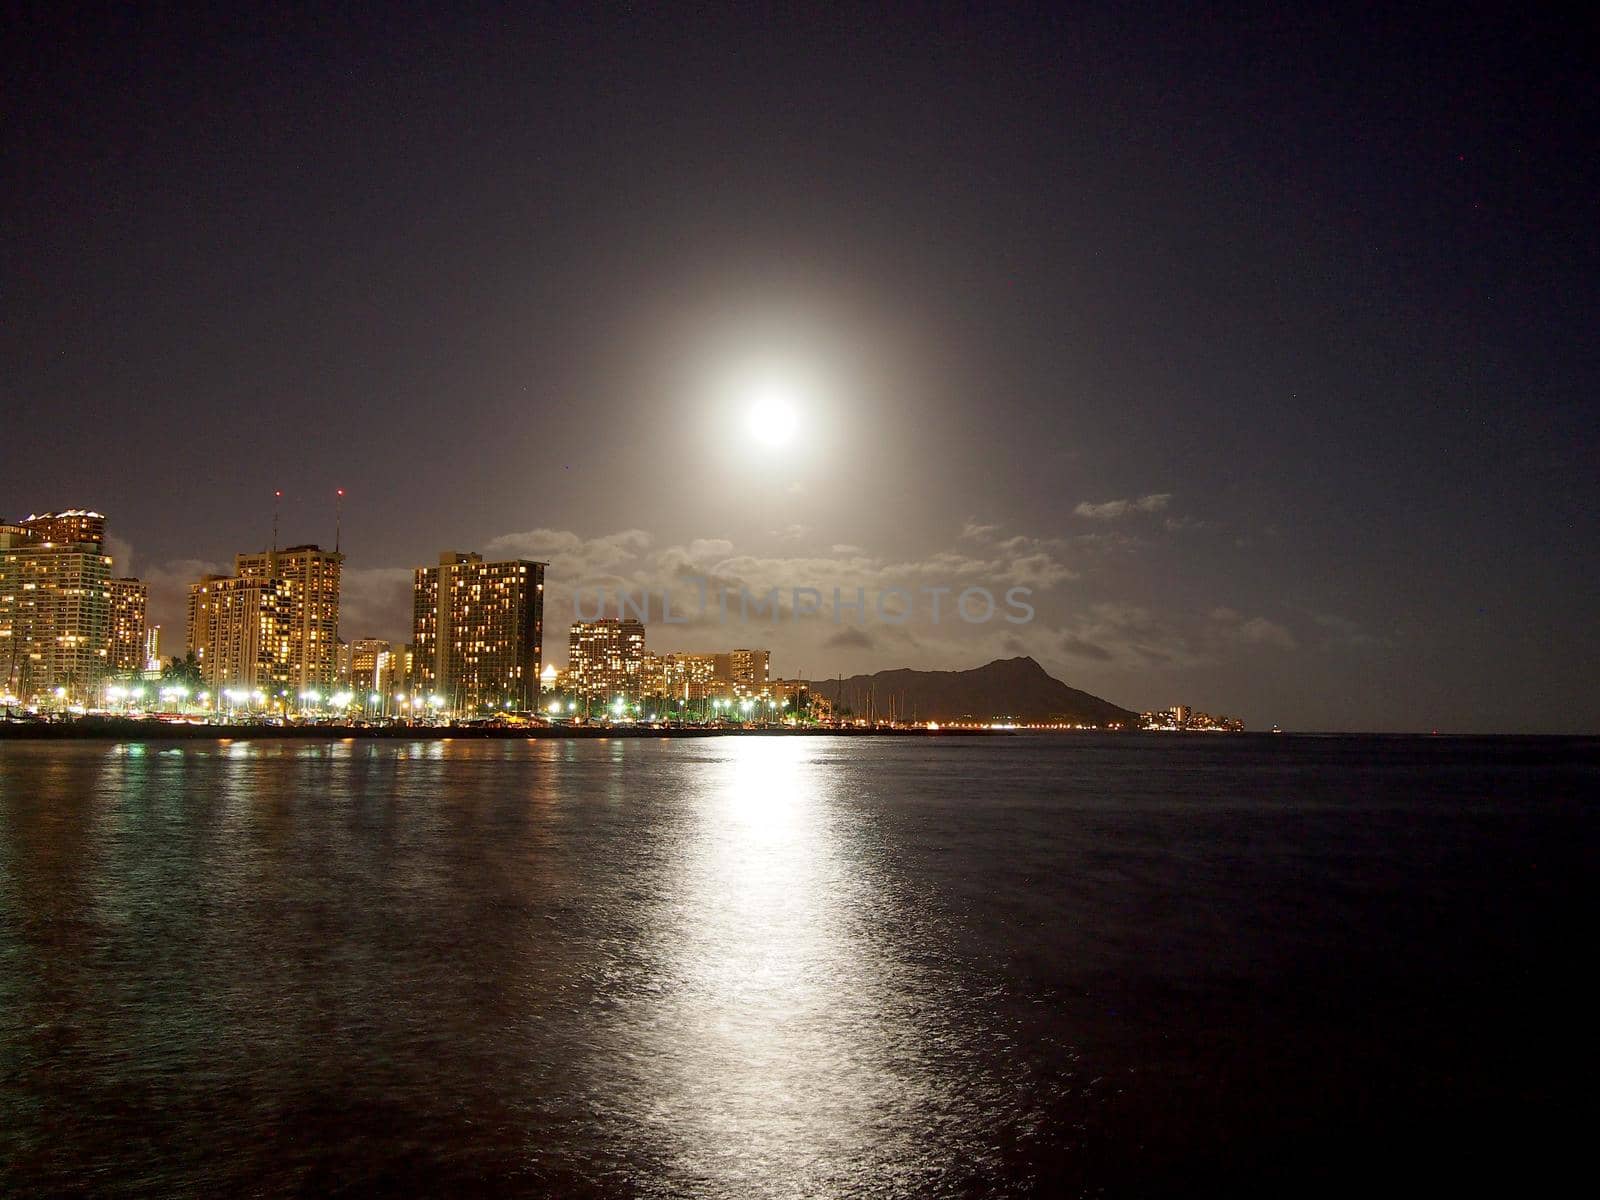 Full Large Moon hangs over Diamond Head Crater, Waikiki hotels, and Marina by EricGBVD